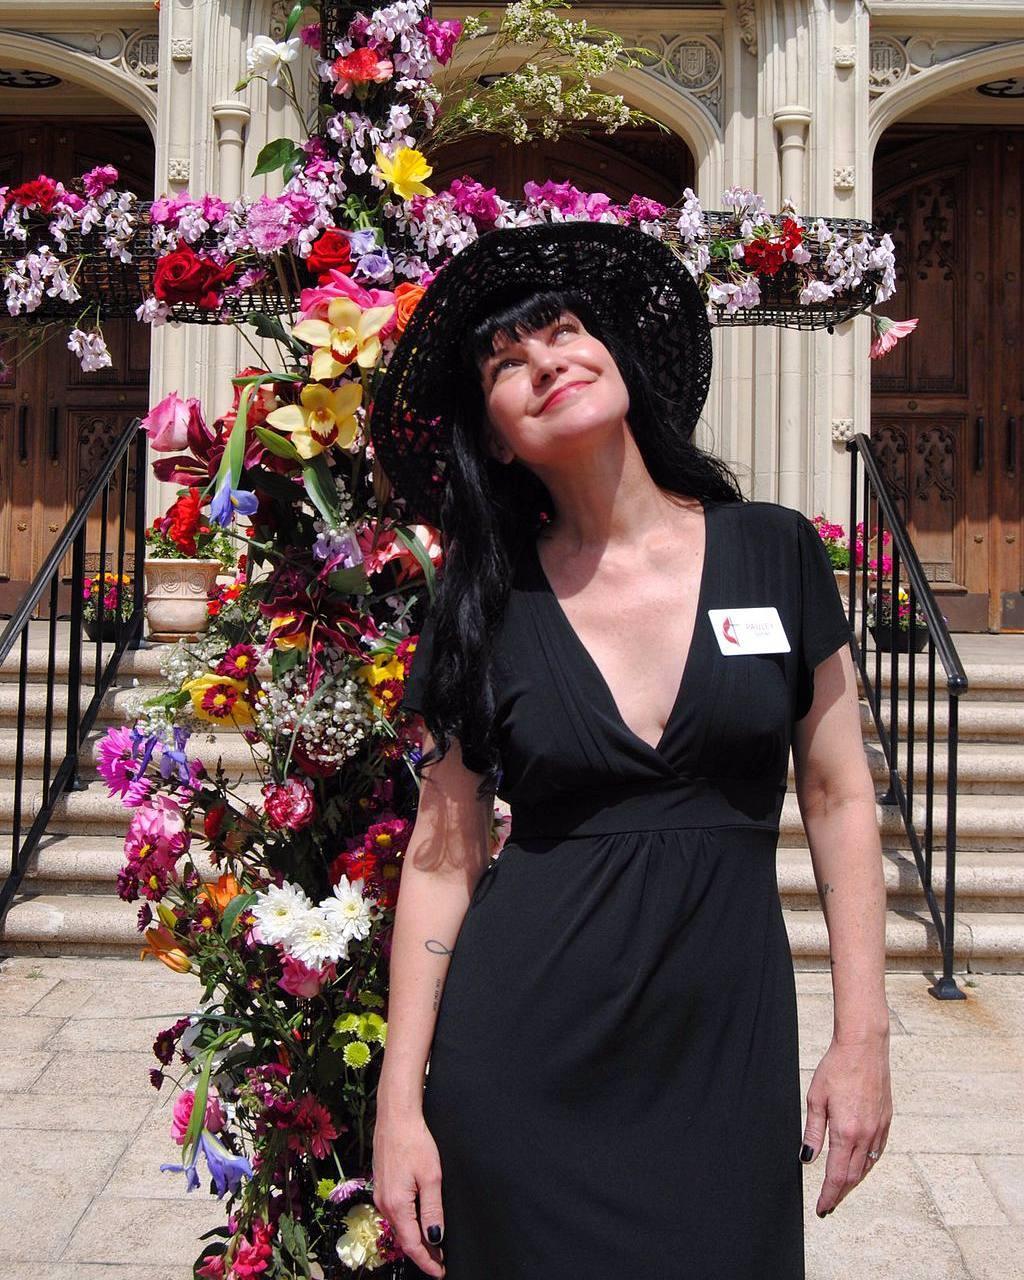 A photo of Pauley Perrette in a black dress, and behind her are multicolored flowers.